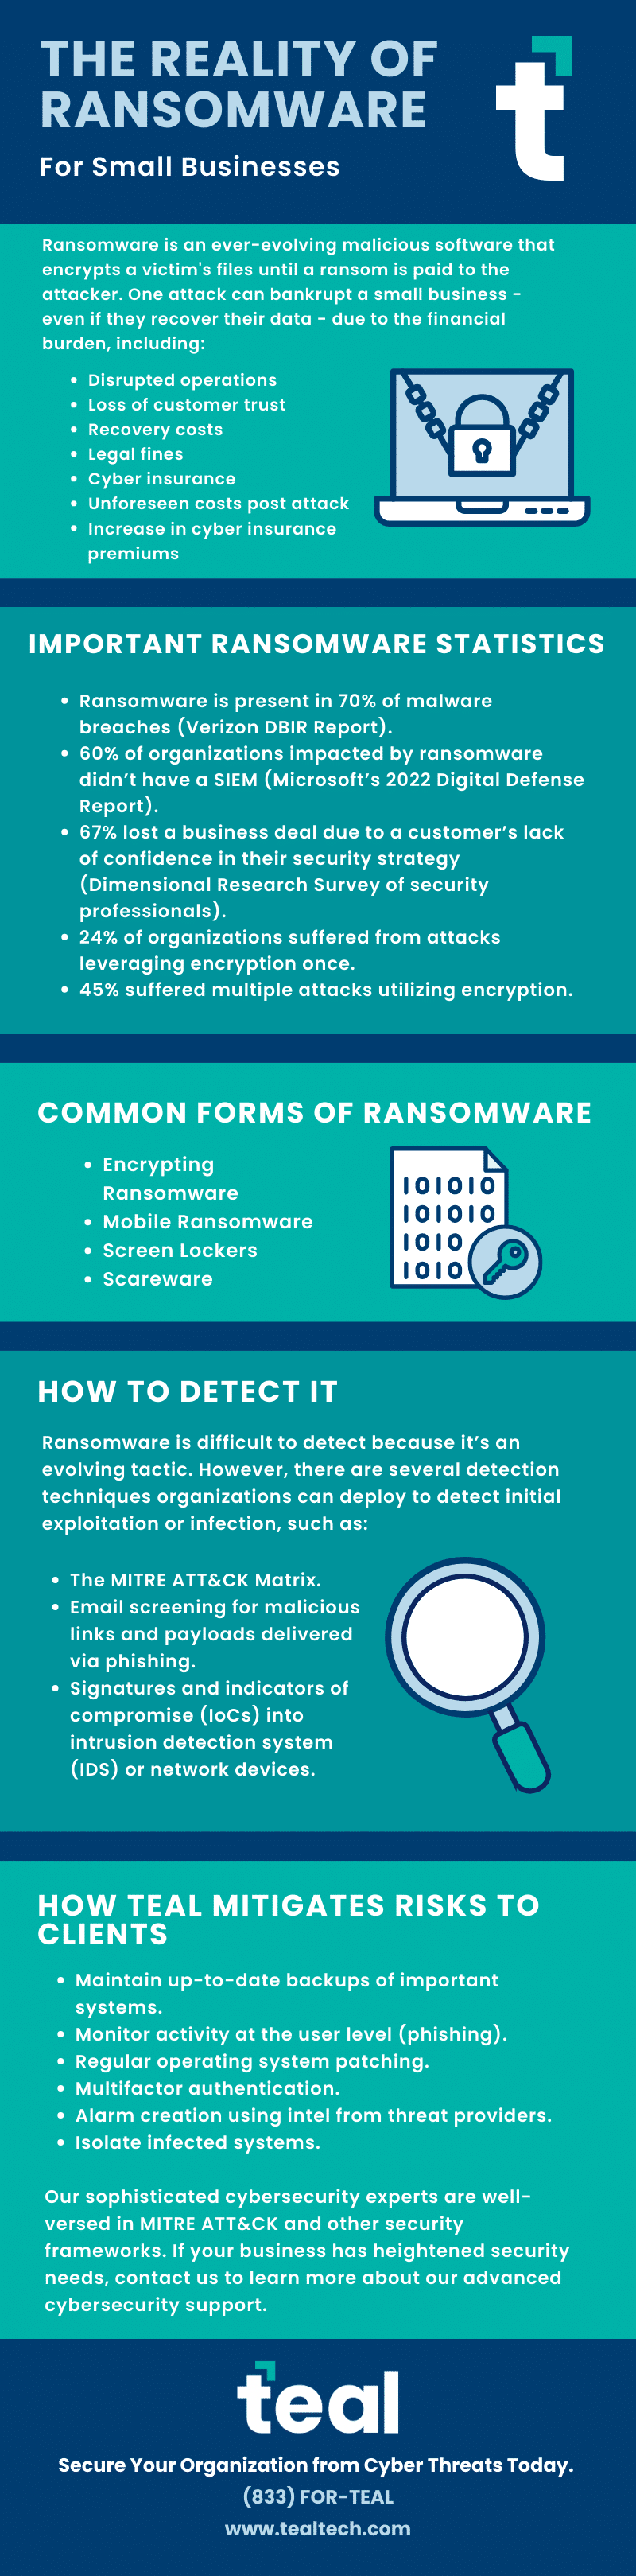 Teal Ransomware Infographic